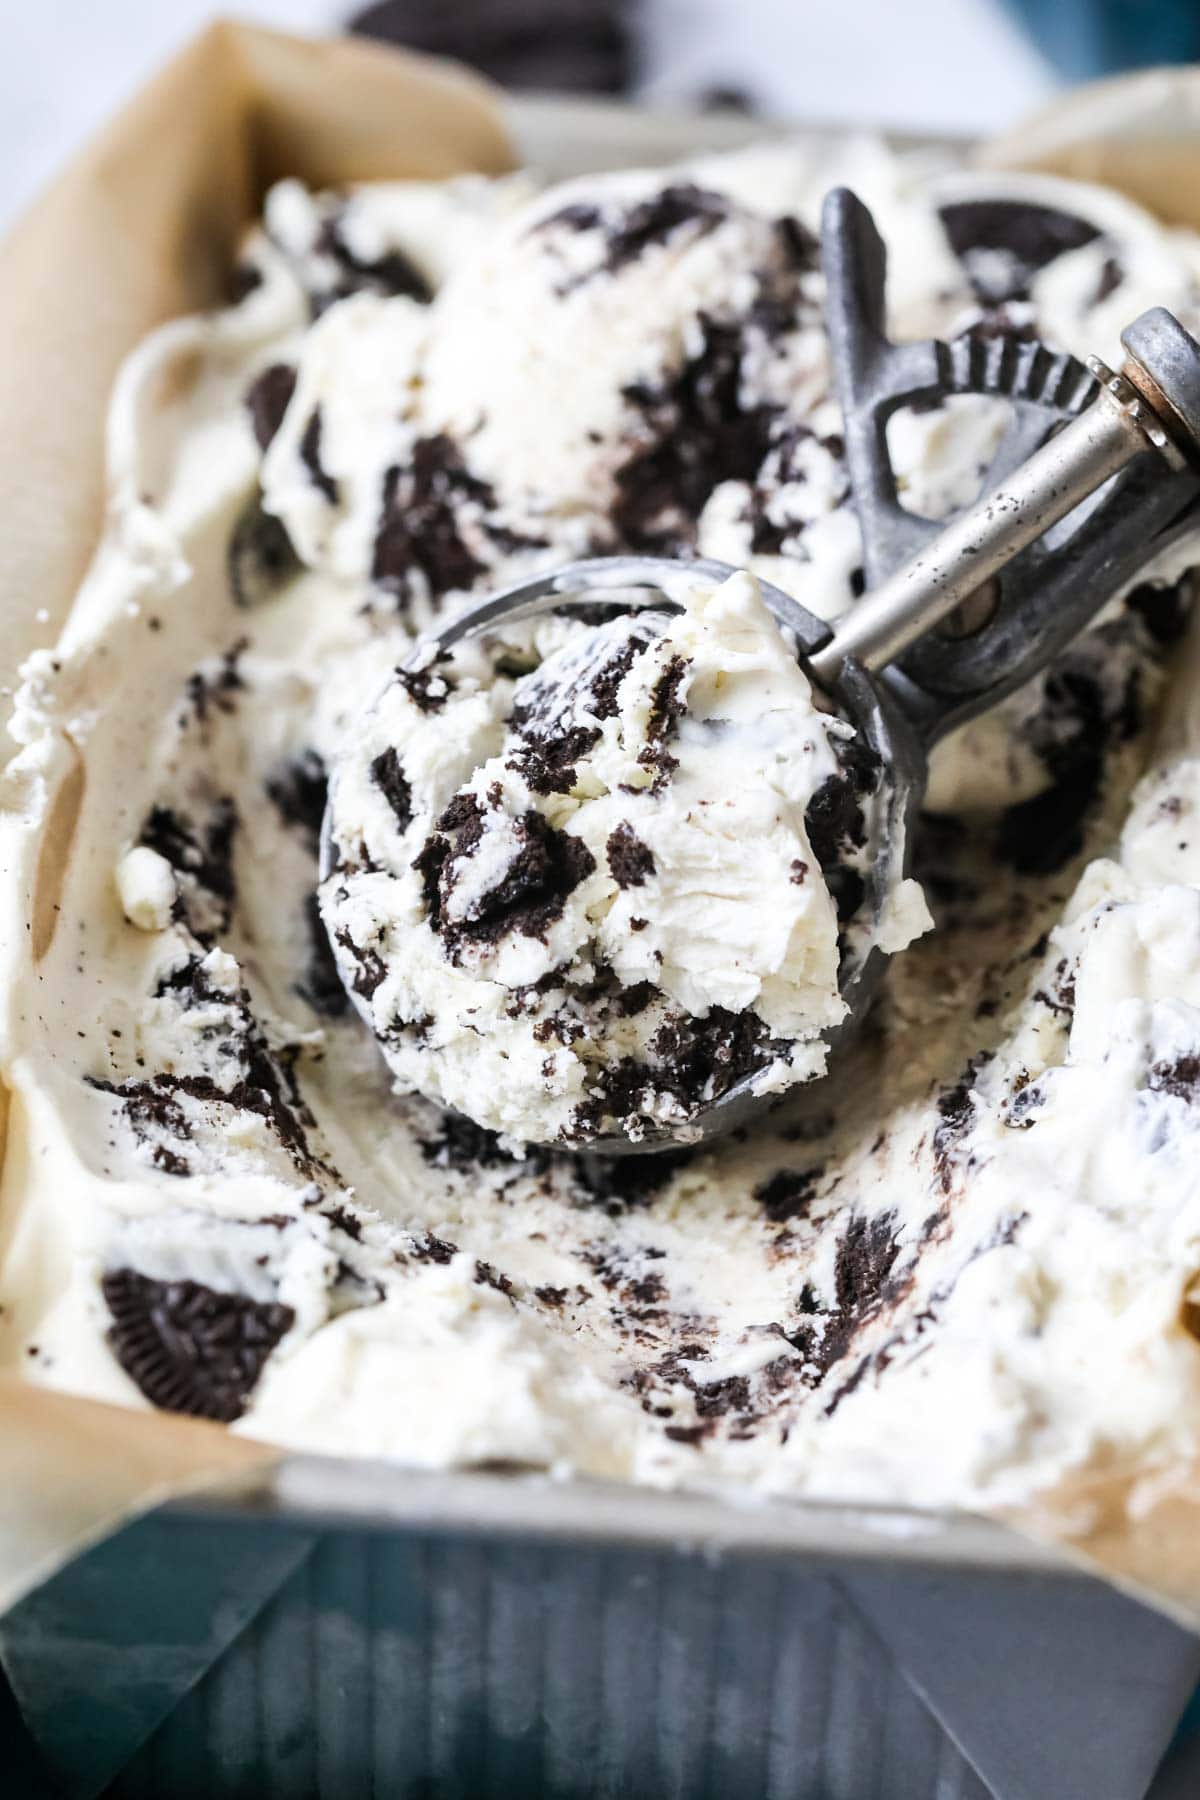 Close-up view of an ice cream scoop scooping Oreo ice cream from a pan.